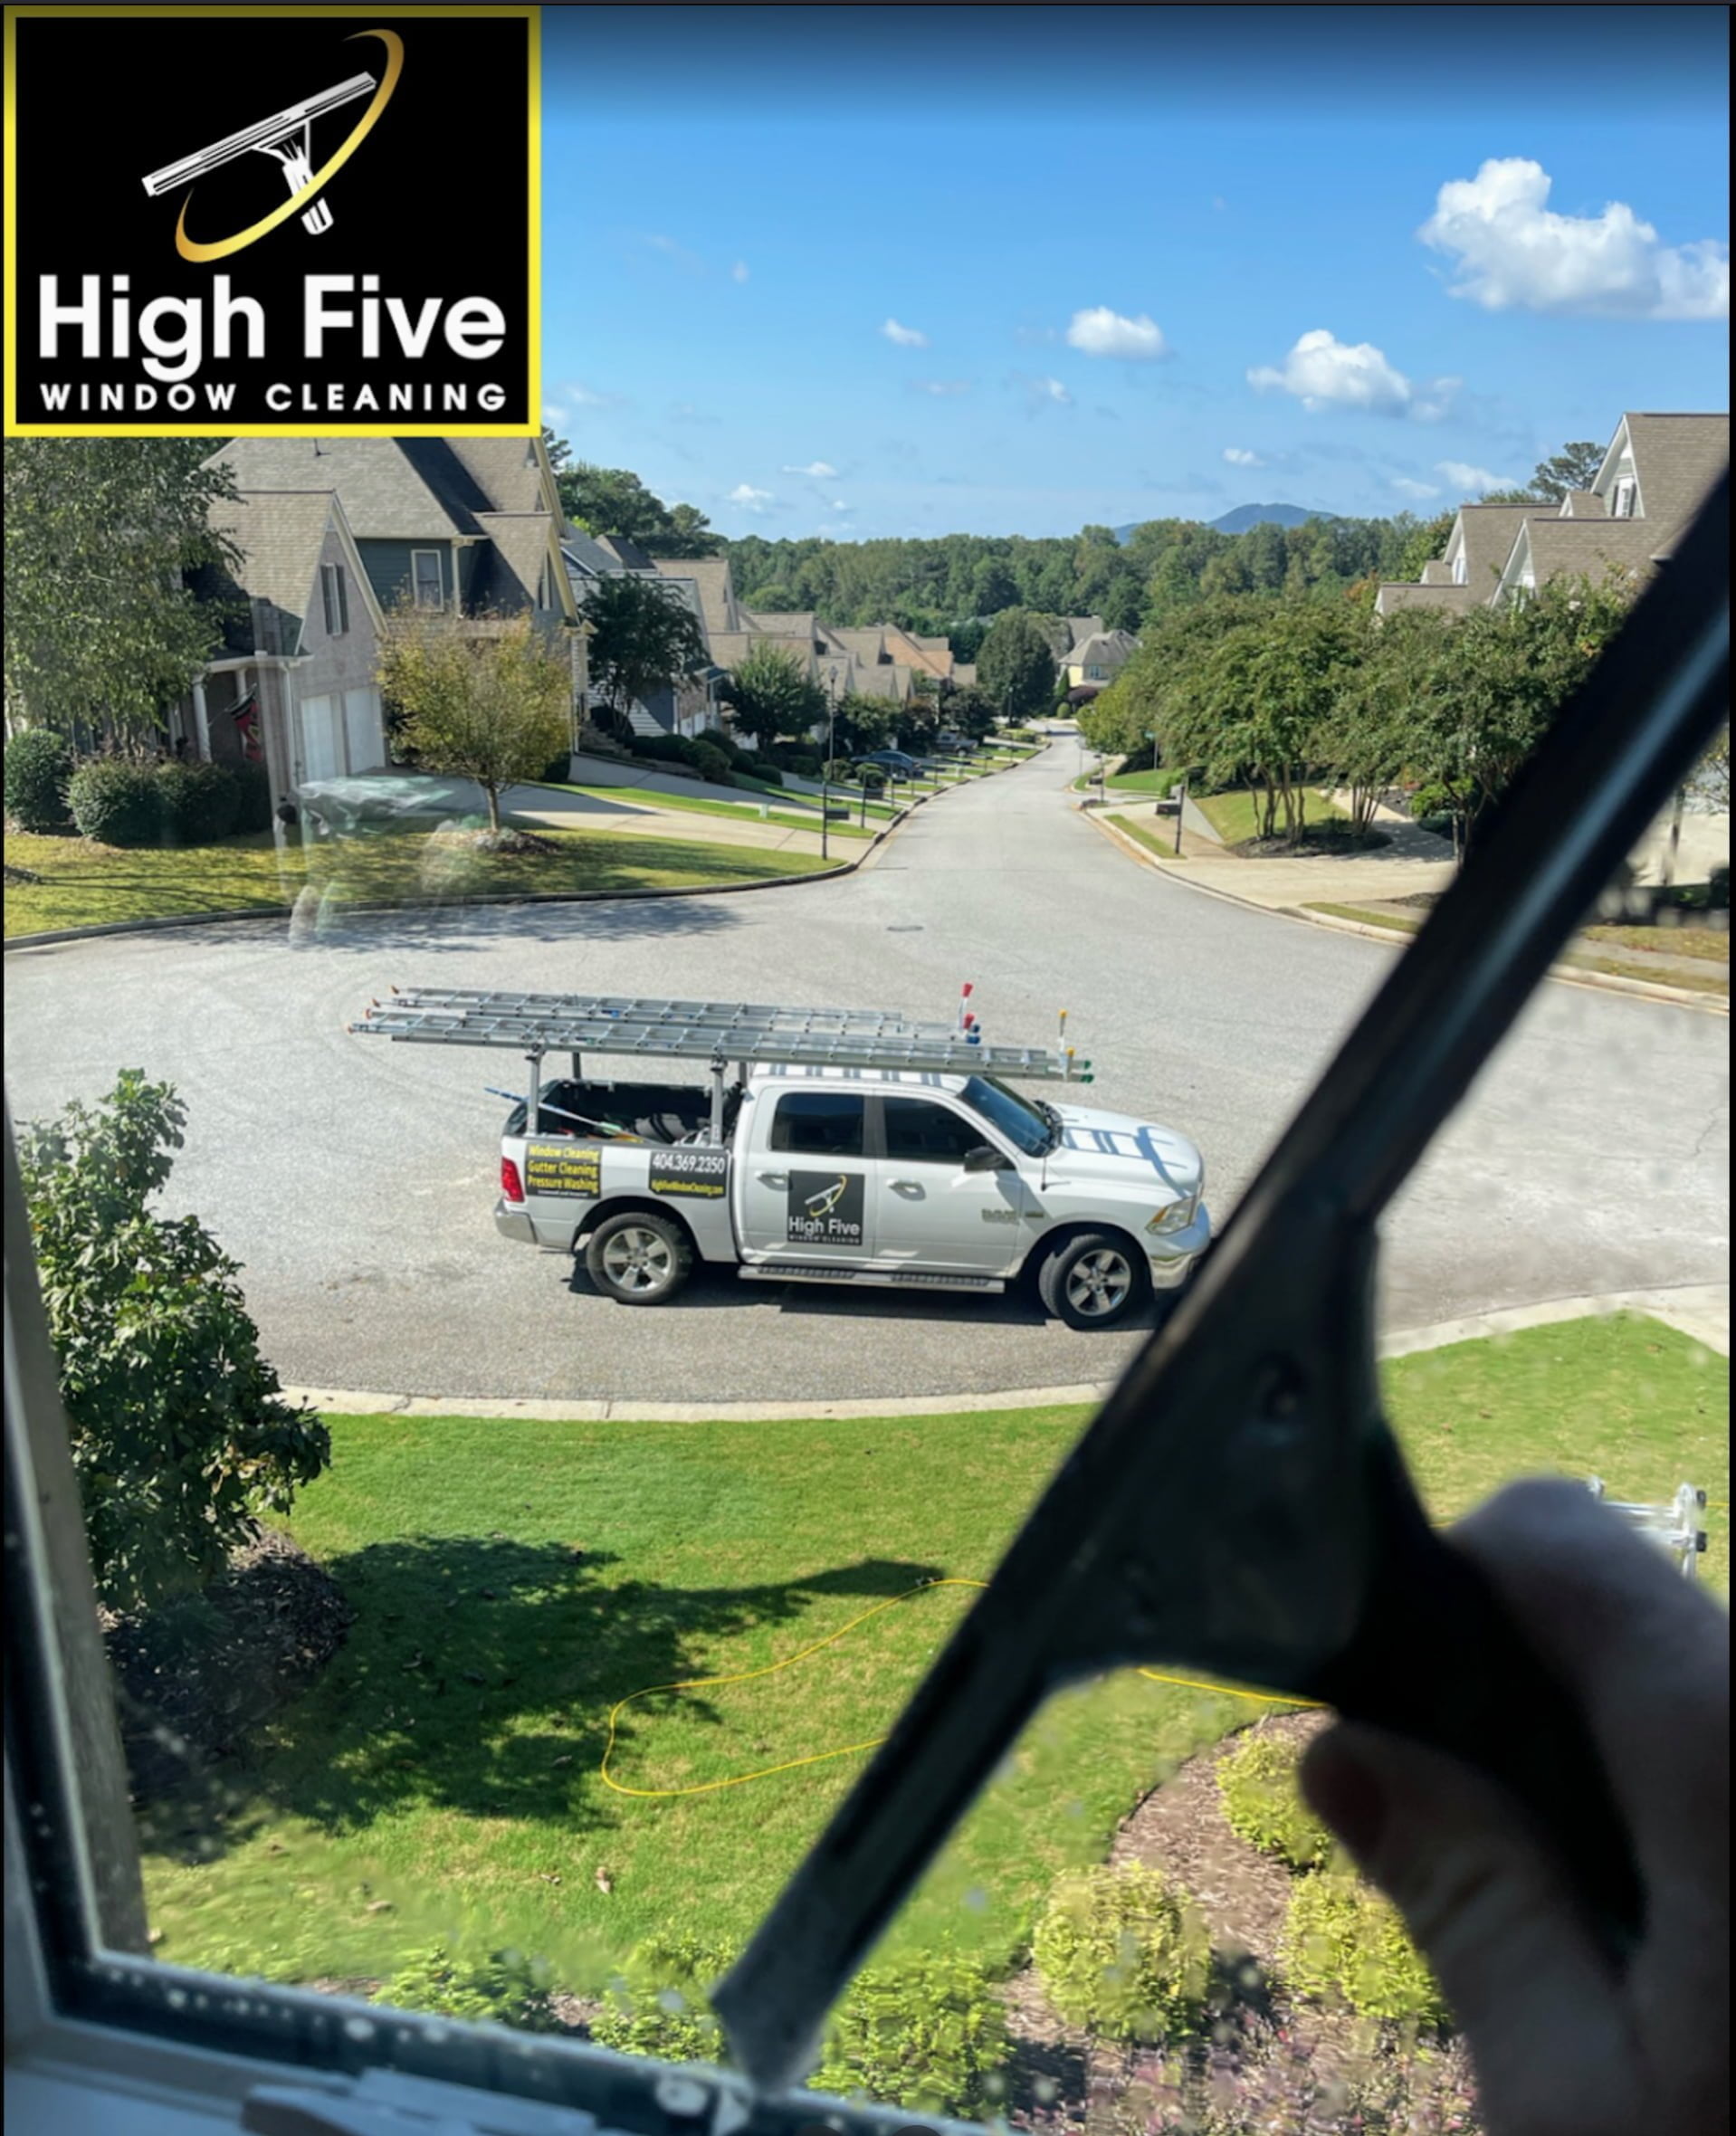 High Five Window Cleaning Window Cleaning Company